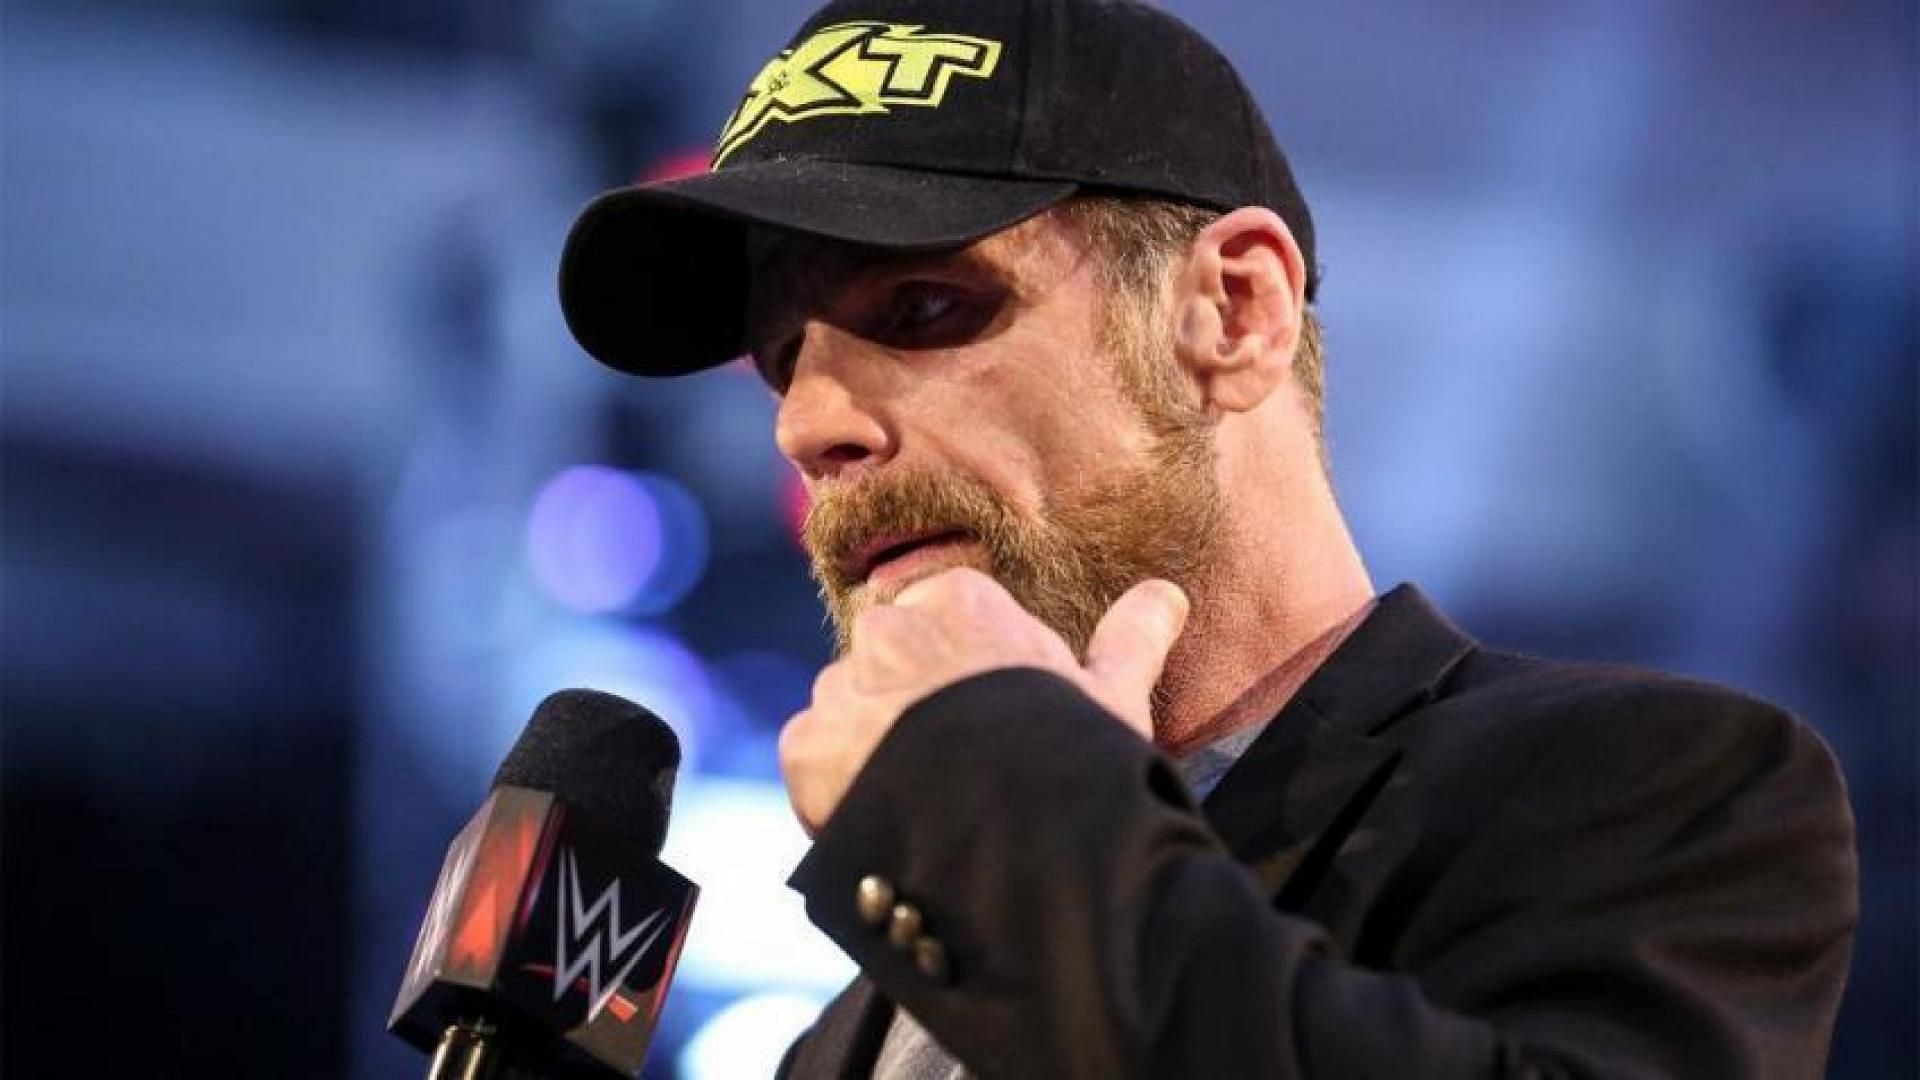 Shawn Michaels reacts to historic WWE NXT WarGames